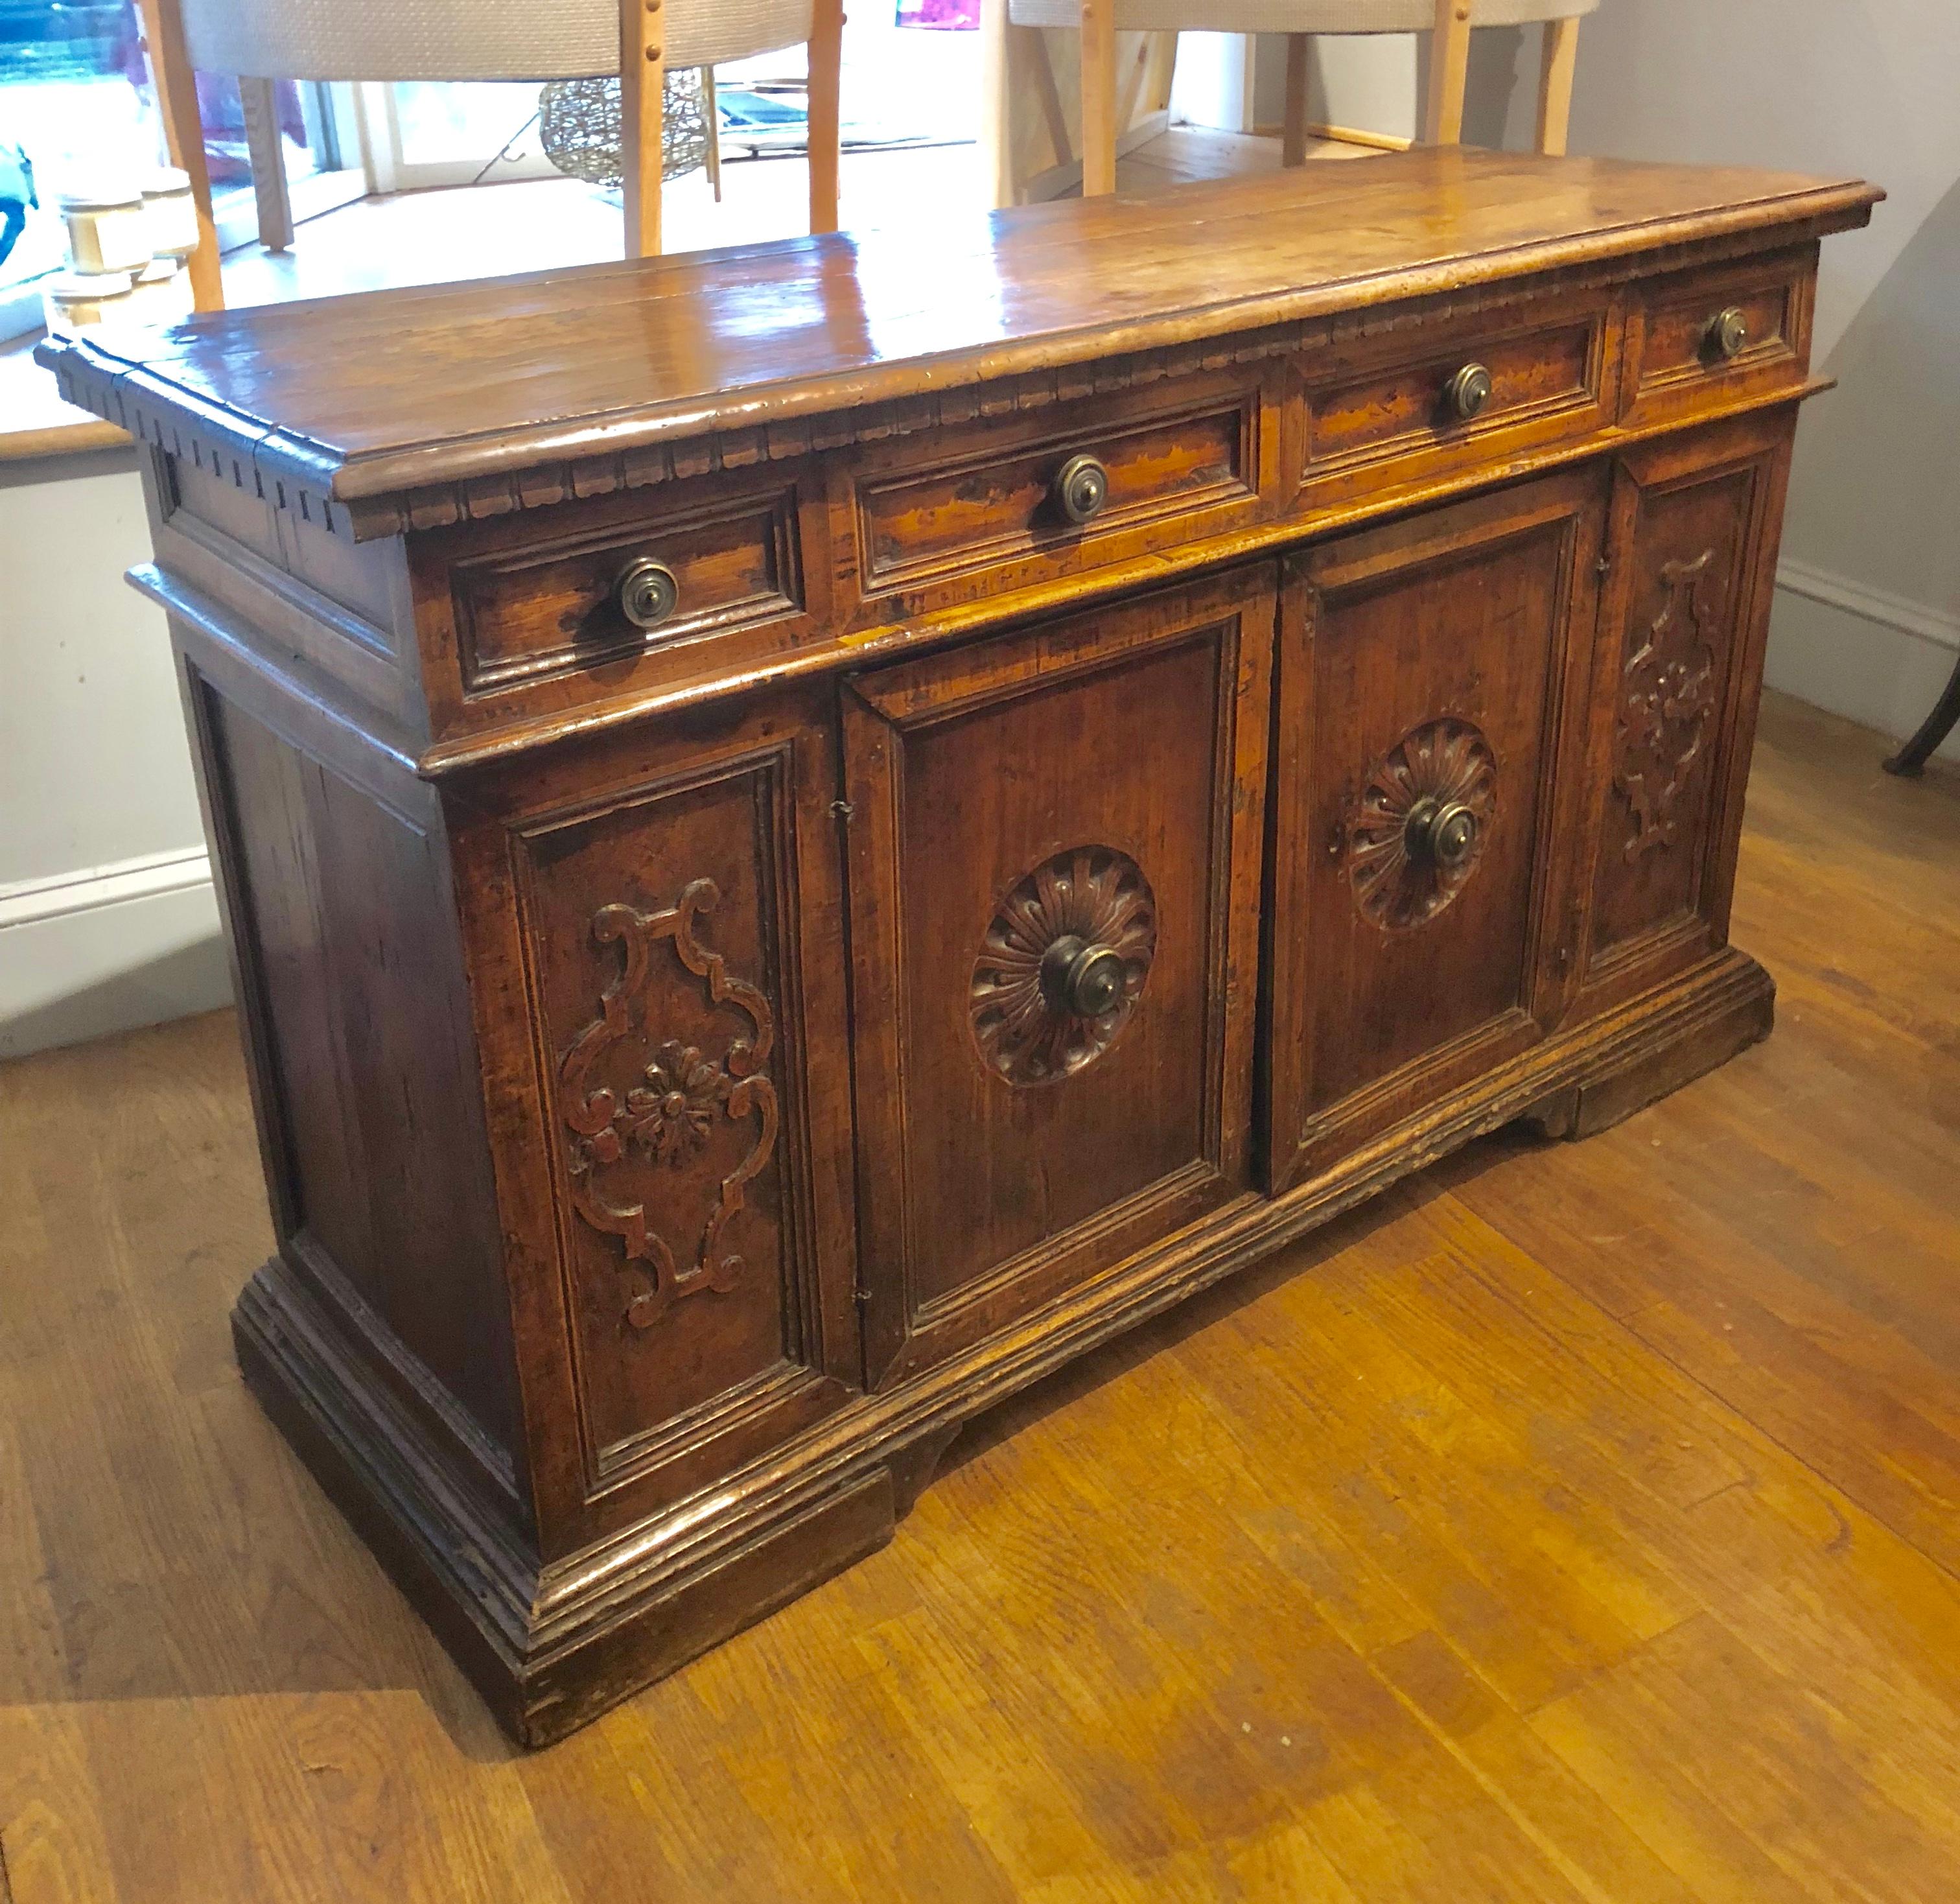 Small Baroque 17th century Italian credenza. Applewood top, the carcass made from a mixture of Circassian walnut and applewood with carved decoration and the original bronze handles, wonderful rich color and lustrous patination. Made in Tuscany,